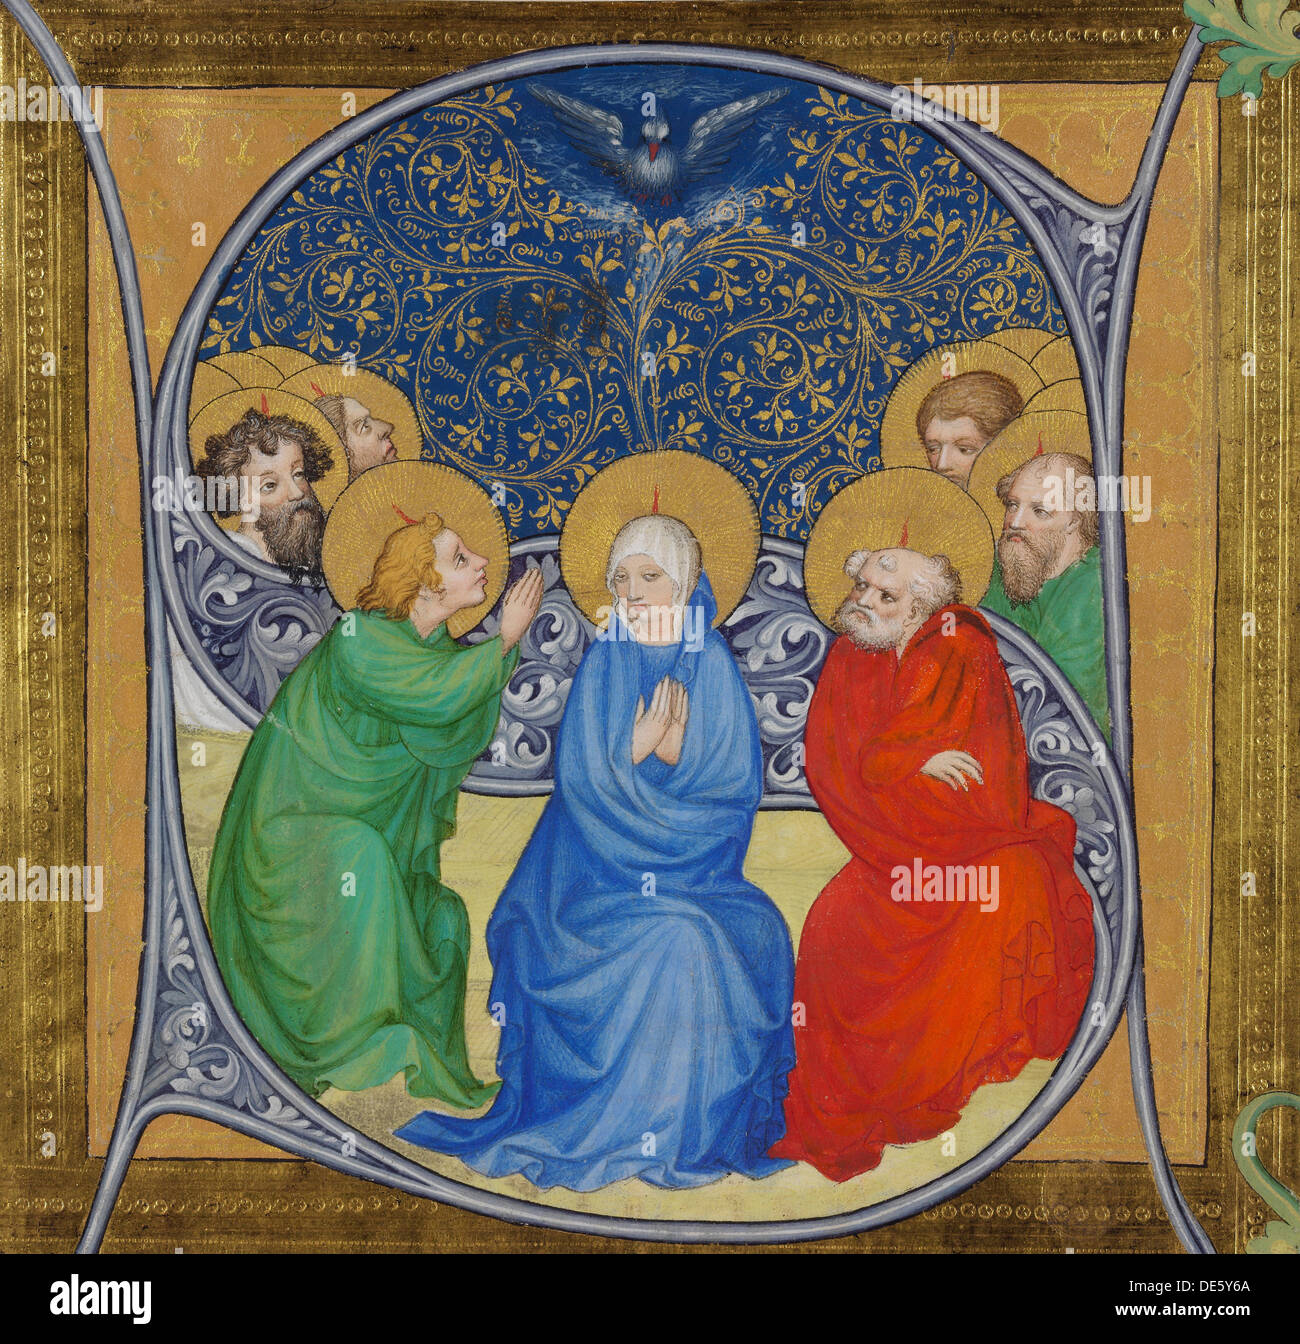 The descent of the Holy Spirit (Pentecost), 1415. Artist: Bohemian Master (active 1410-1420) Stock Photo